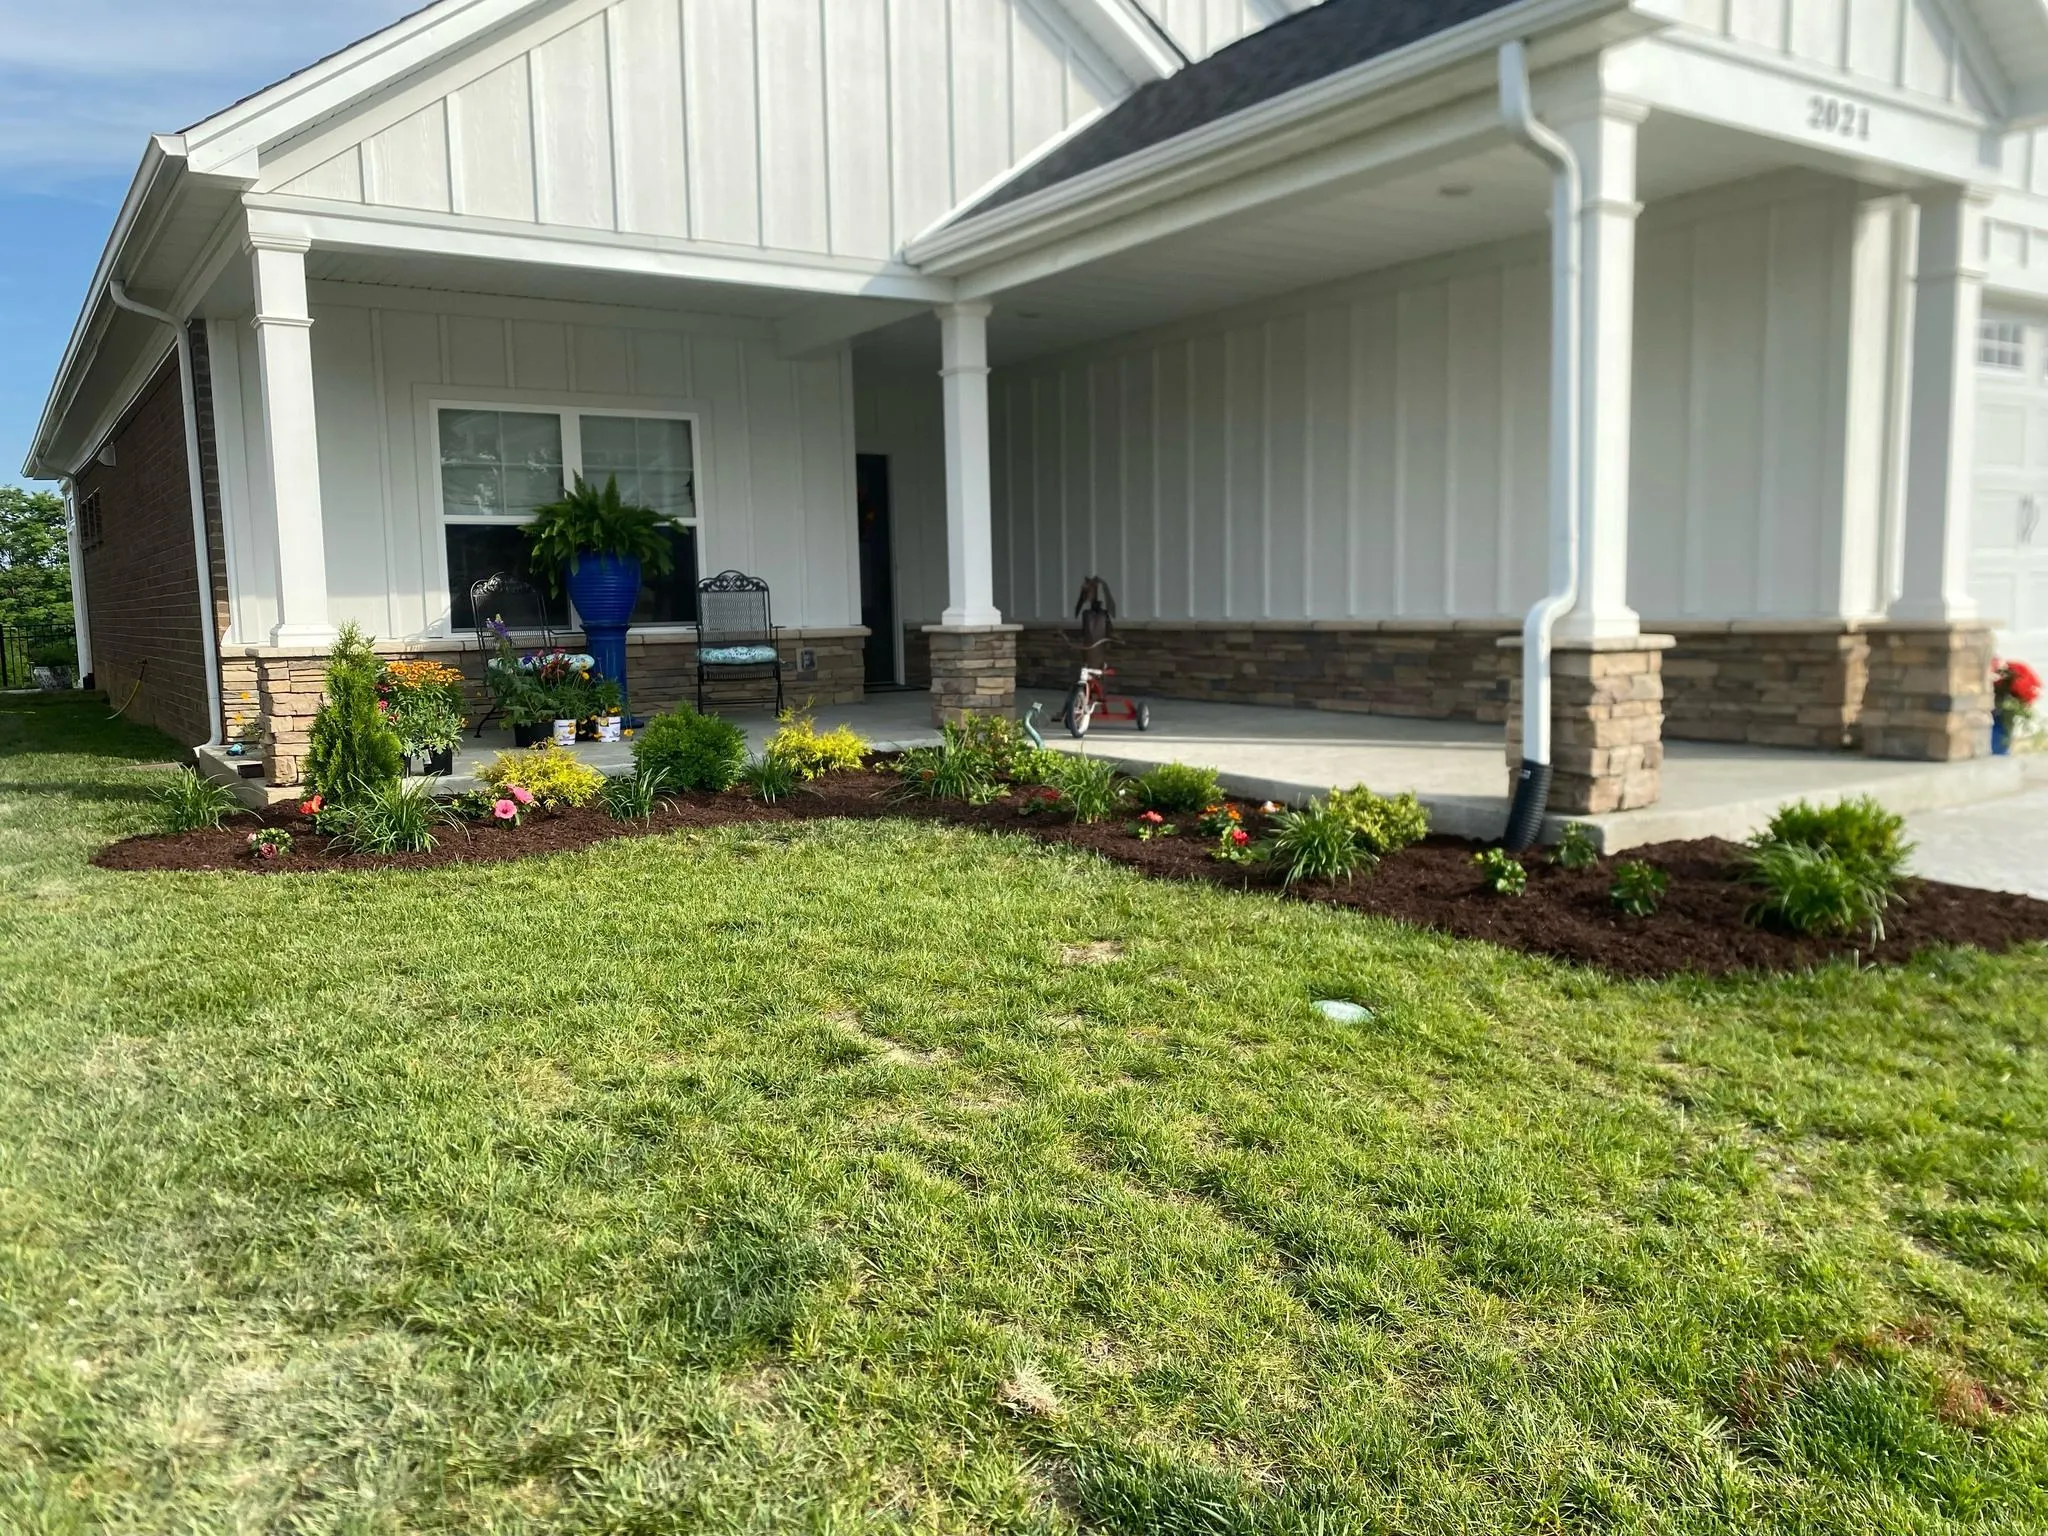 Landscaping for Lamb's Lawn Service & Landscaping in Floyds Knobs, IN